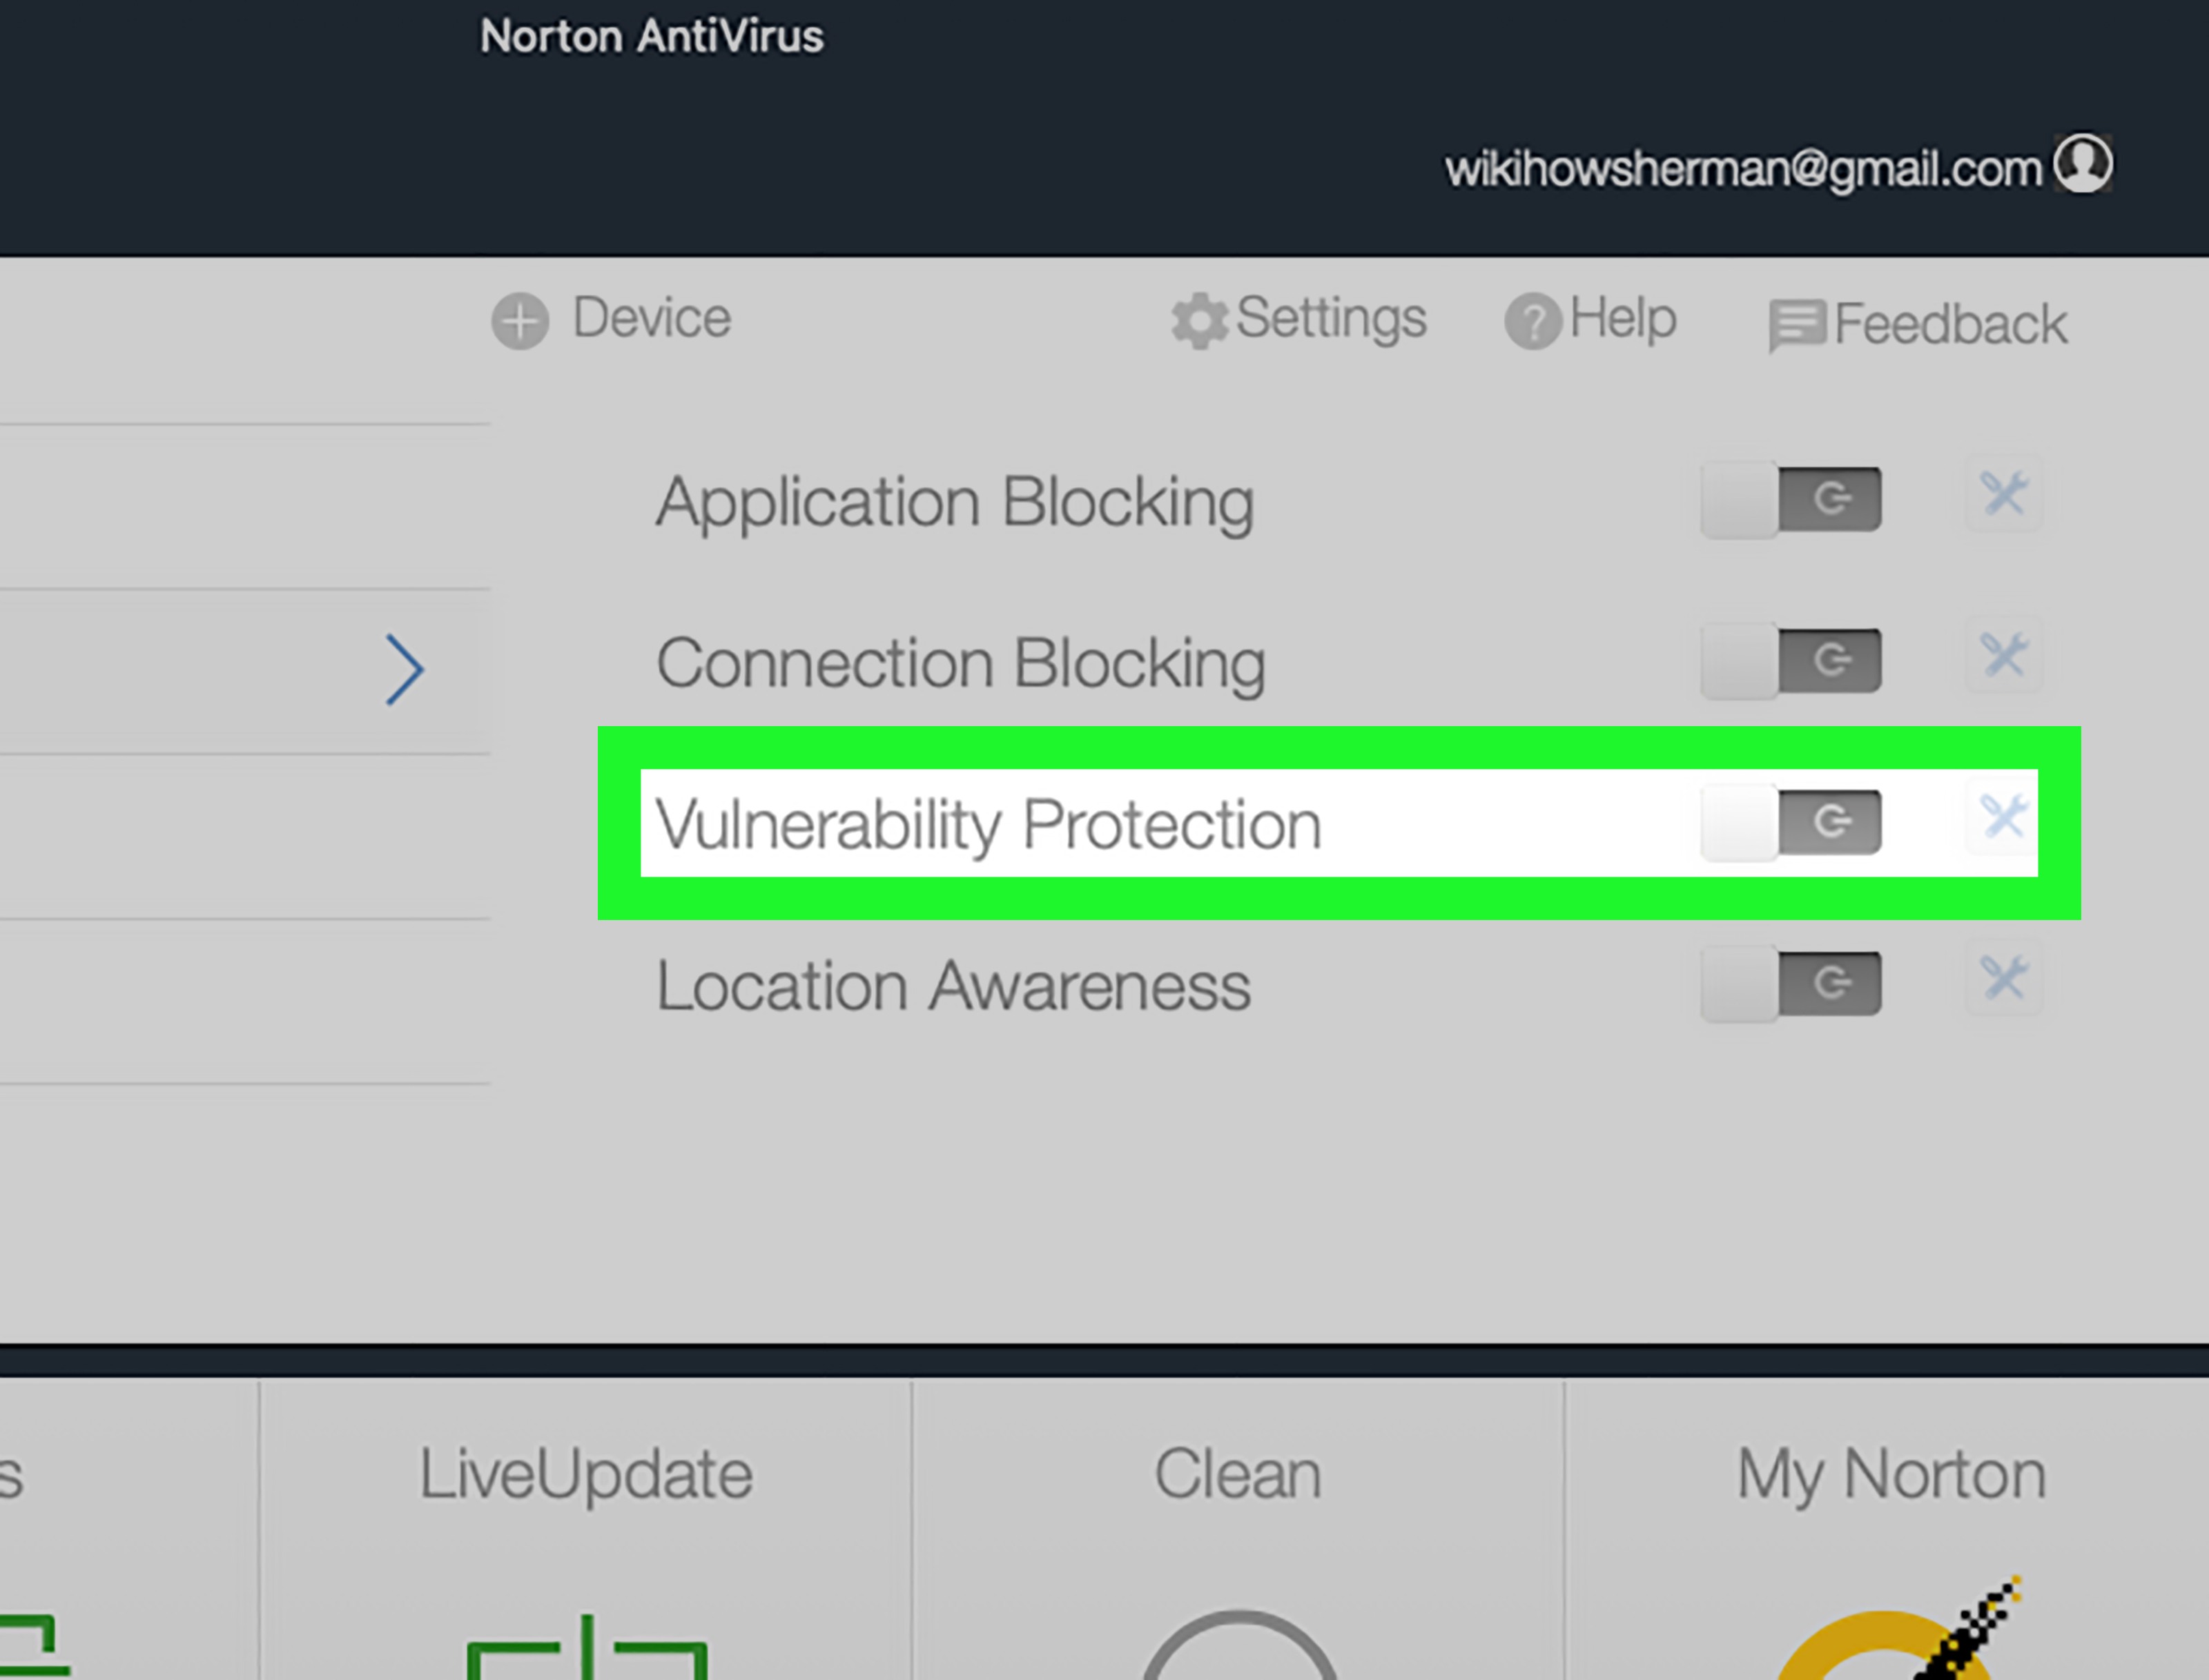 Open your antivirus or firewall software.
Locate the option to disable or turn off the software temporarily.